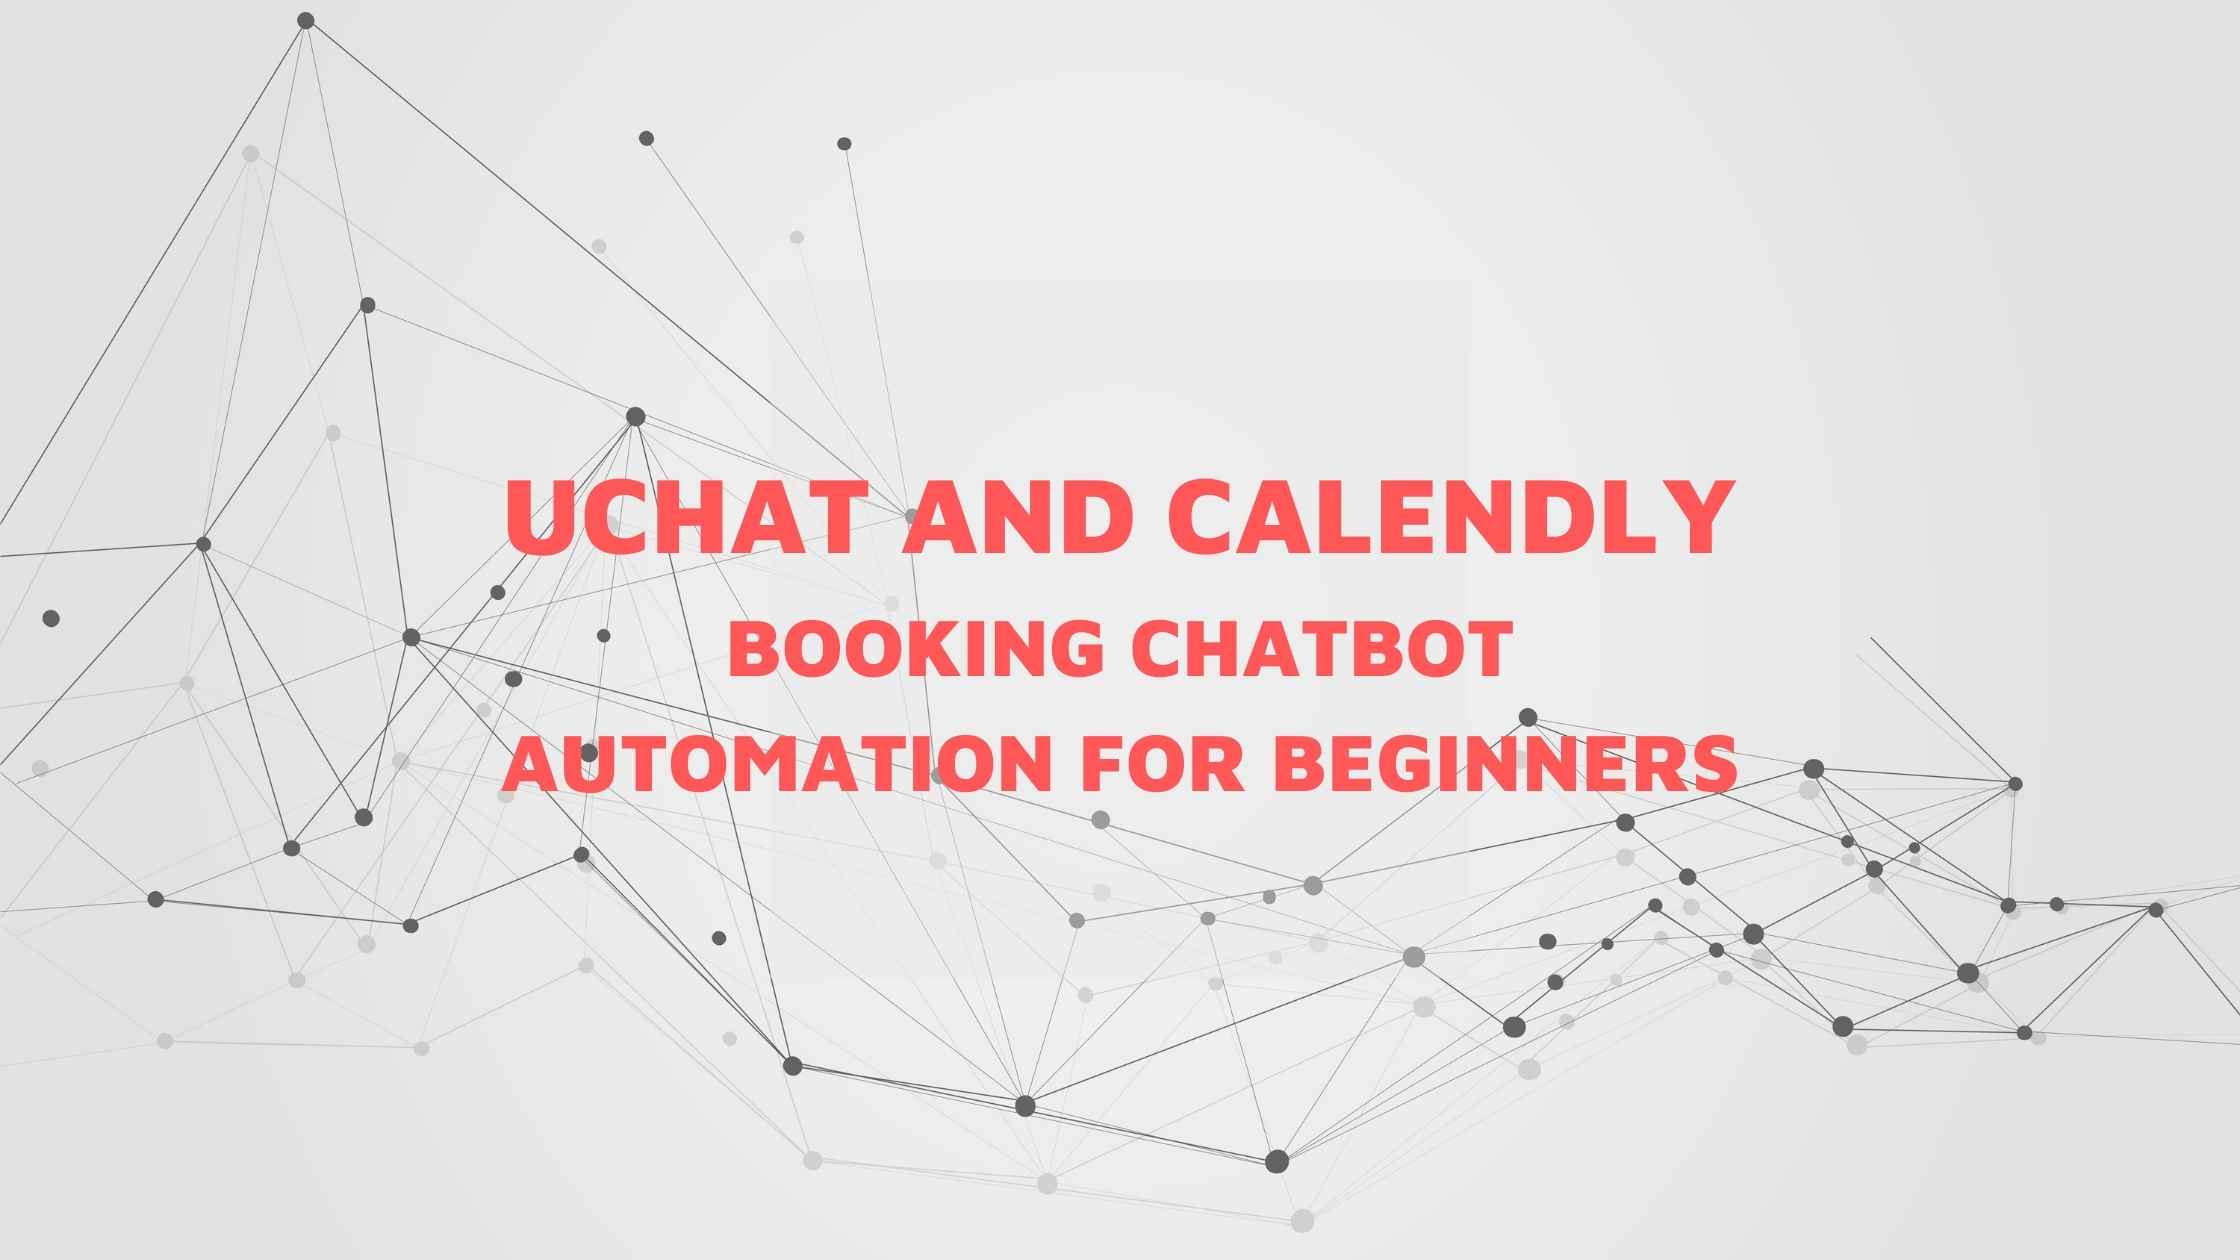 Uchat and Calendly Booking Chatbot Automation for beginners